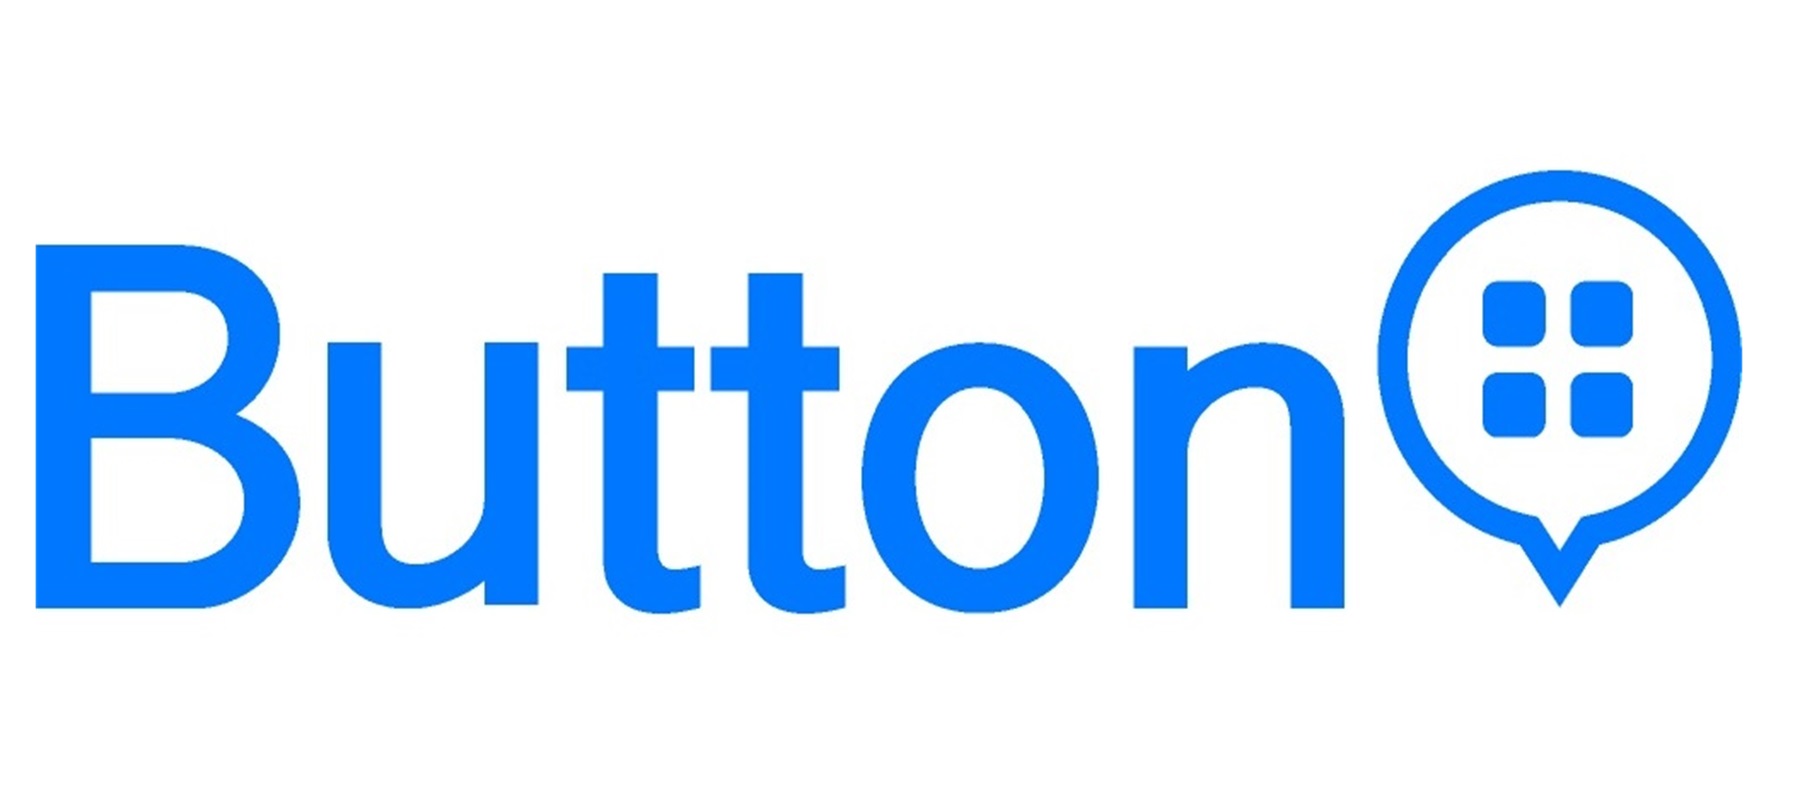 Button launches retail media inventory solution at Cannes Lions to empower publishers and creators